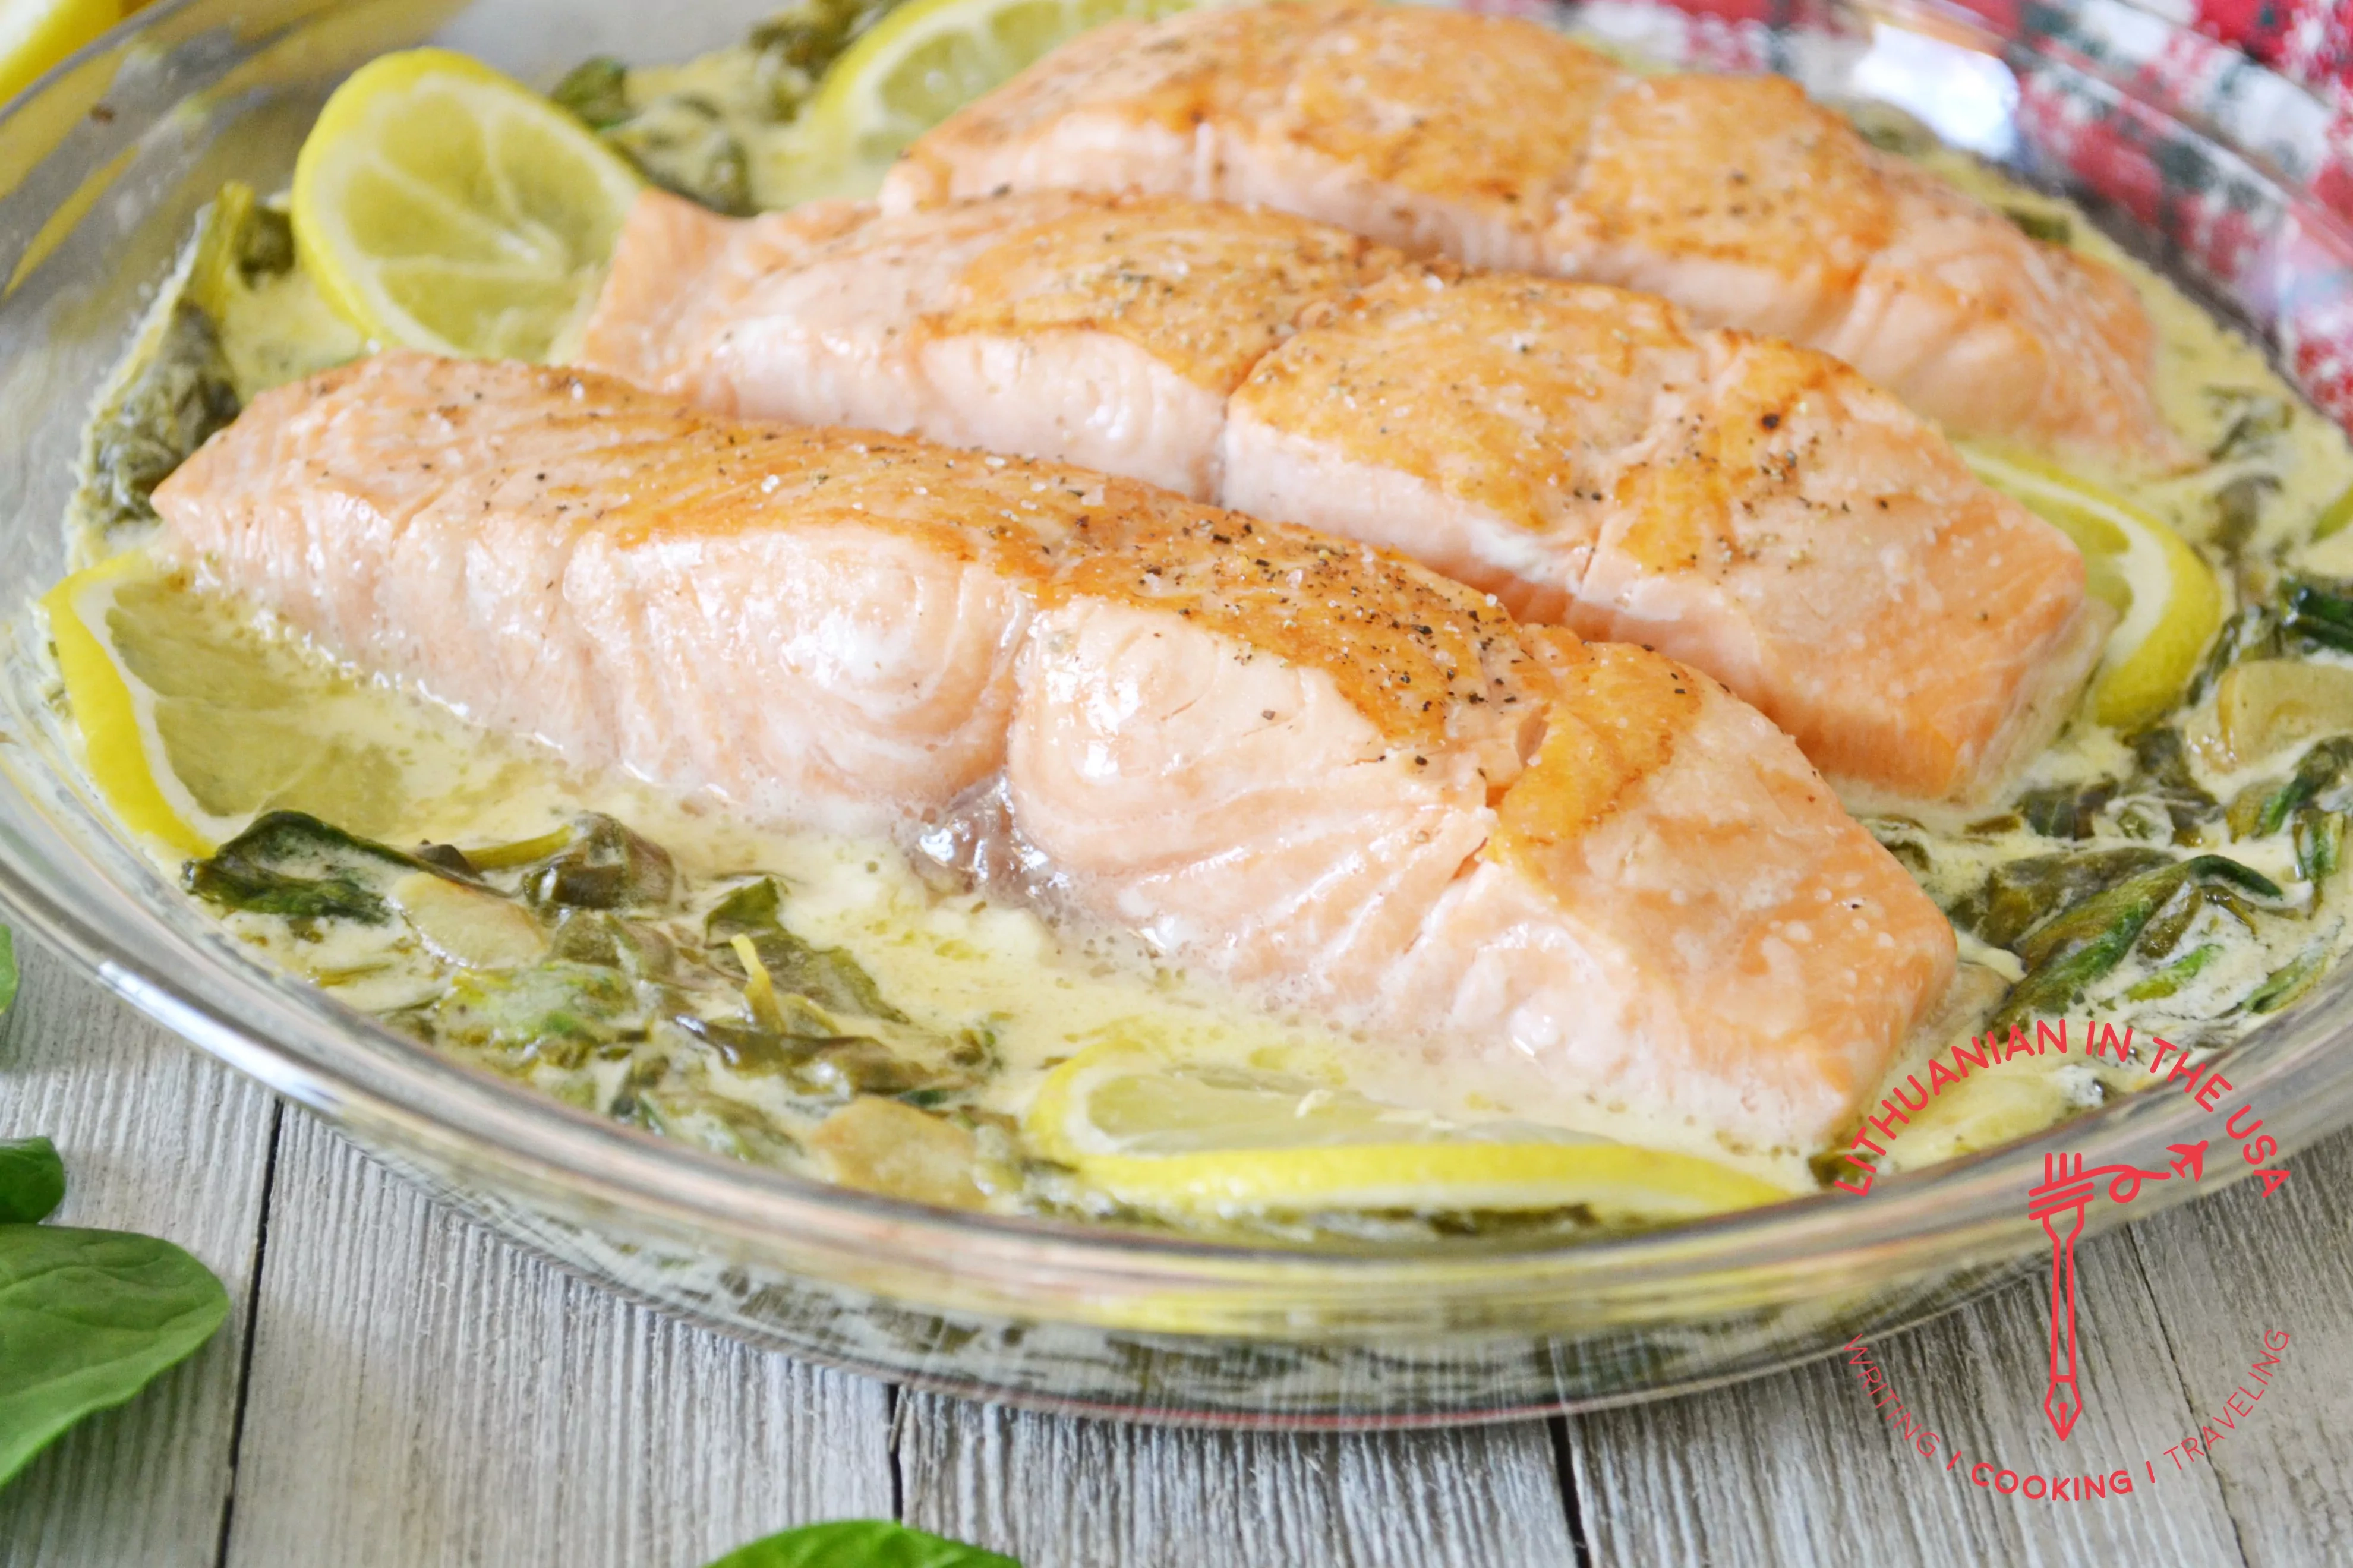 Salmon with Creamy Spinach